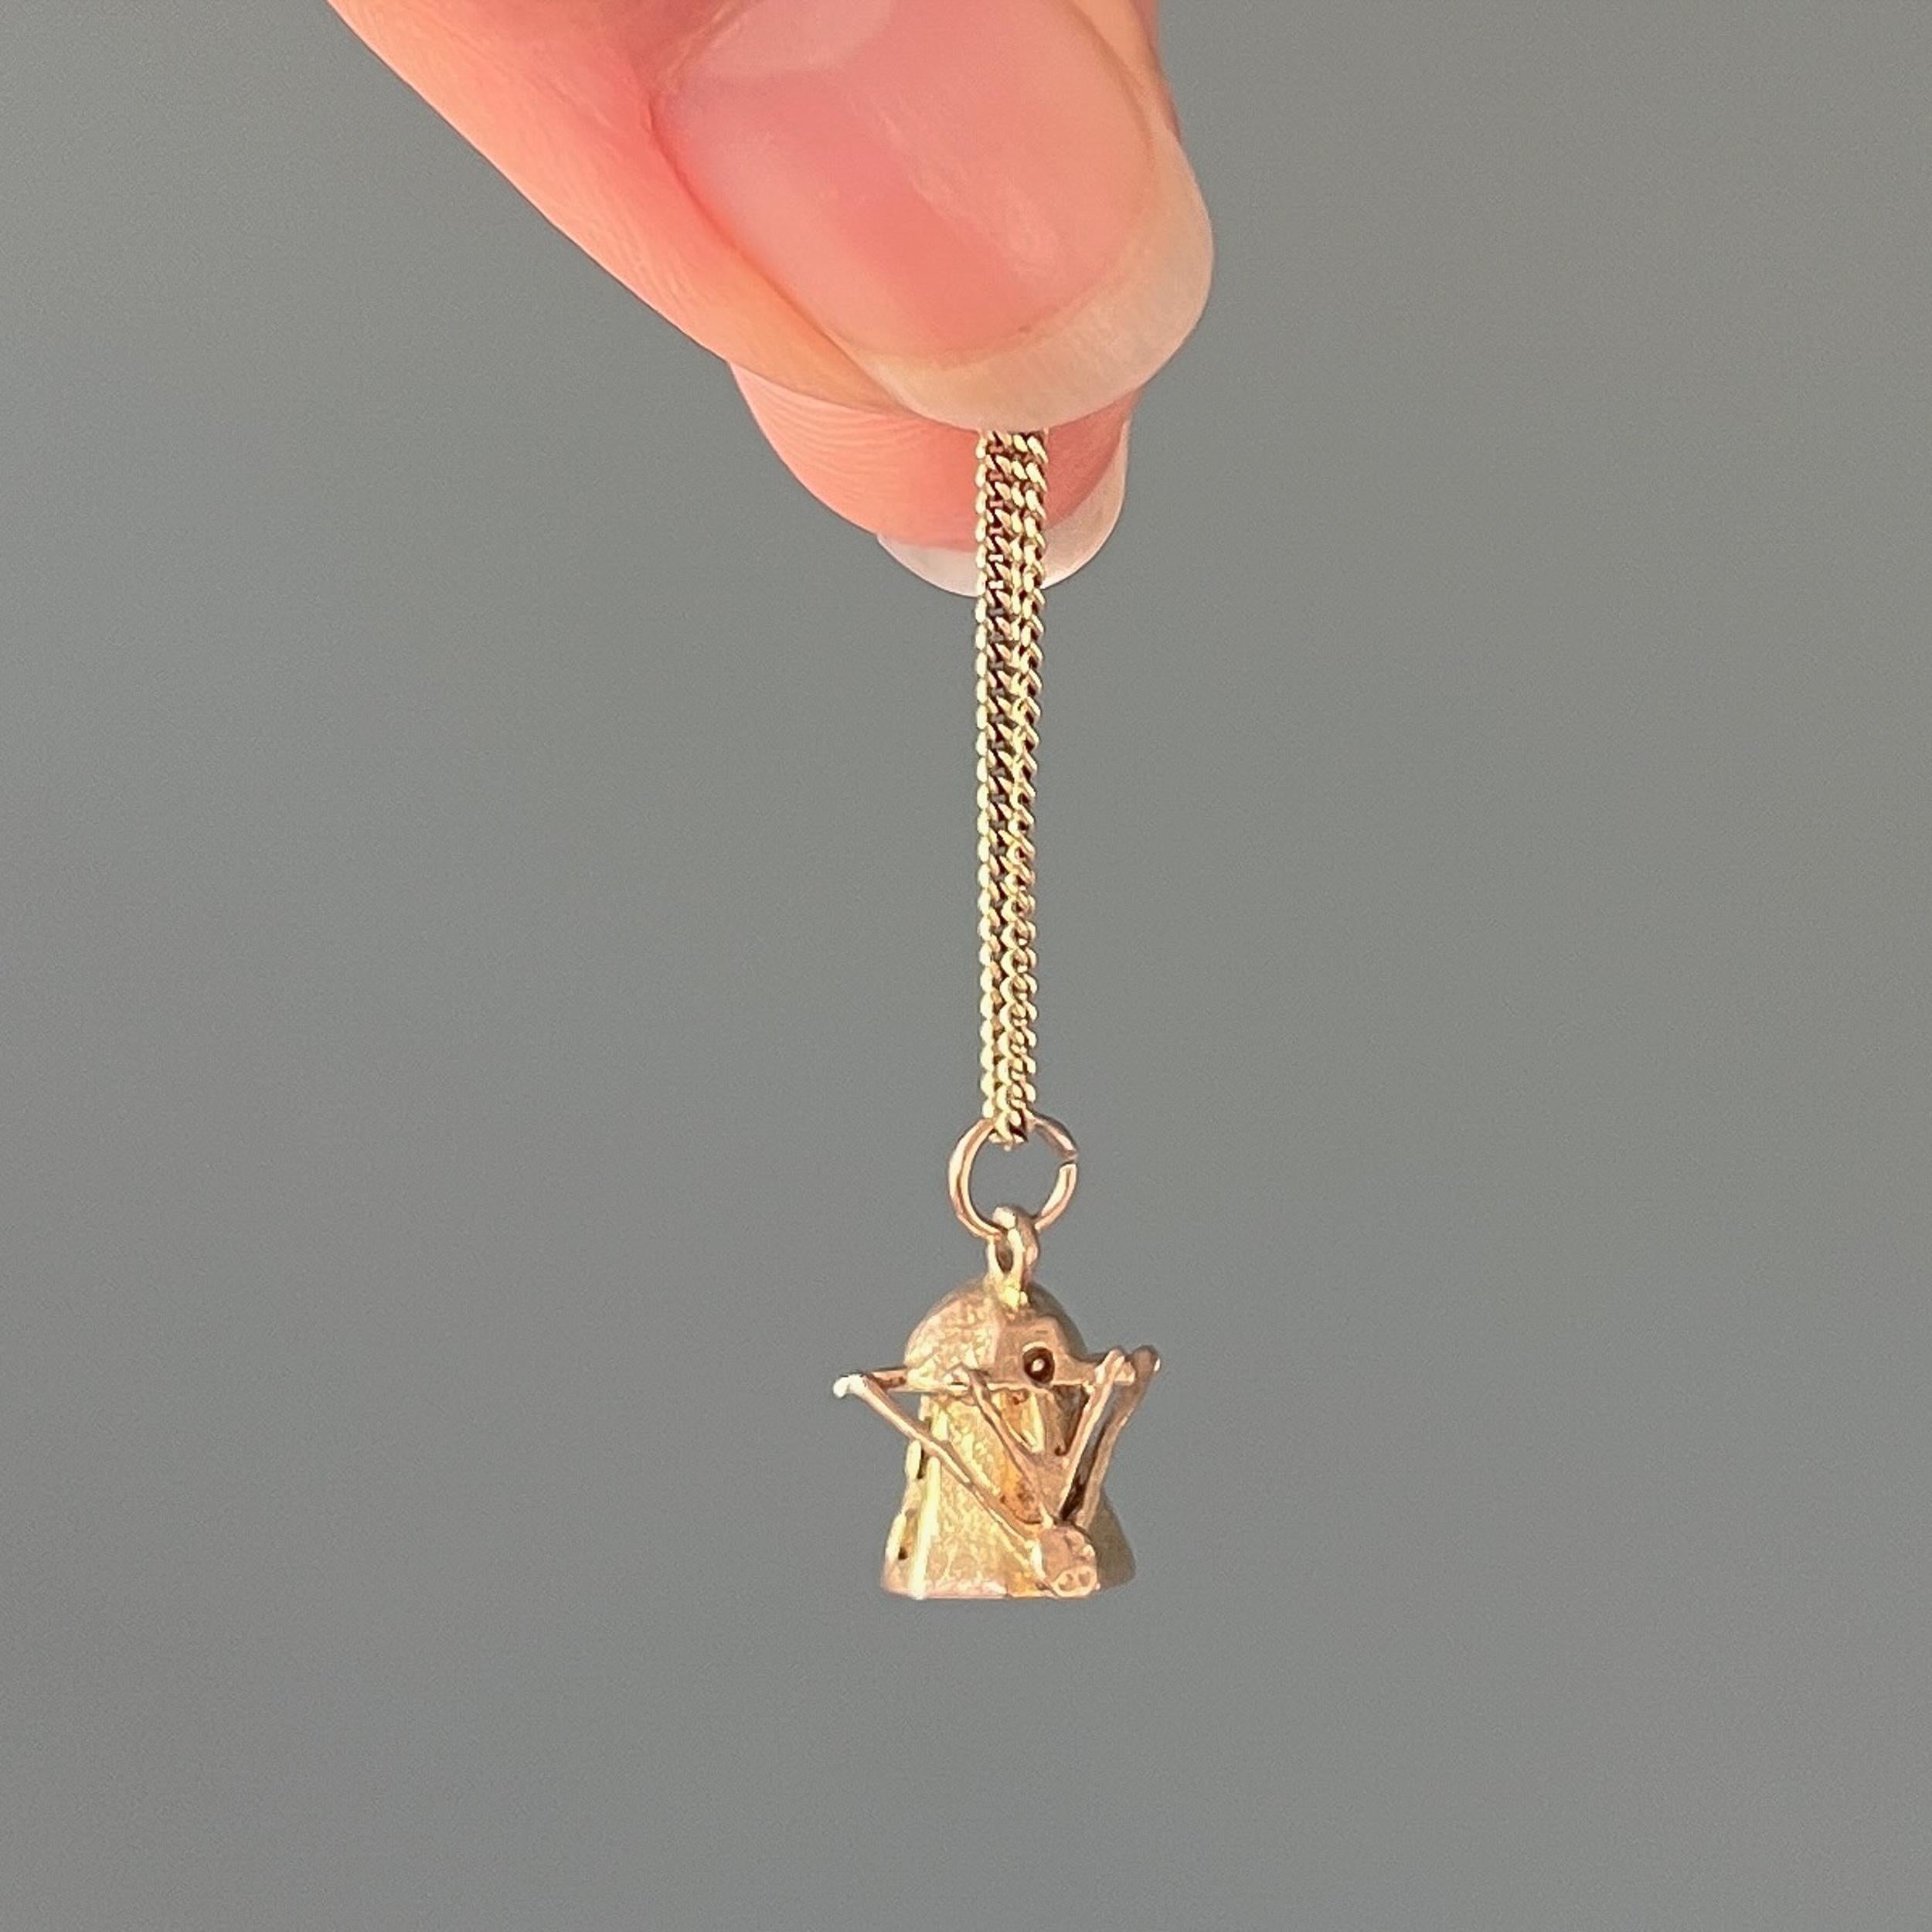 A vintage 9 karat yellow gold small windmill charm pendant. This charm is nicely detailed and beautifully made in gold and it features open windows and an entrance door. The blades of the mill seem to have blown away by the gusts of the wind, which